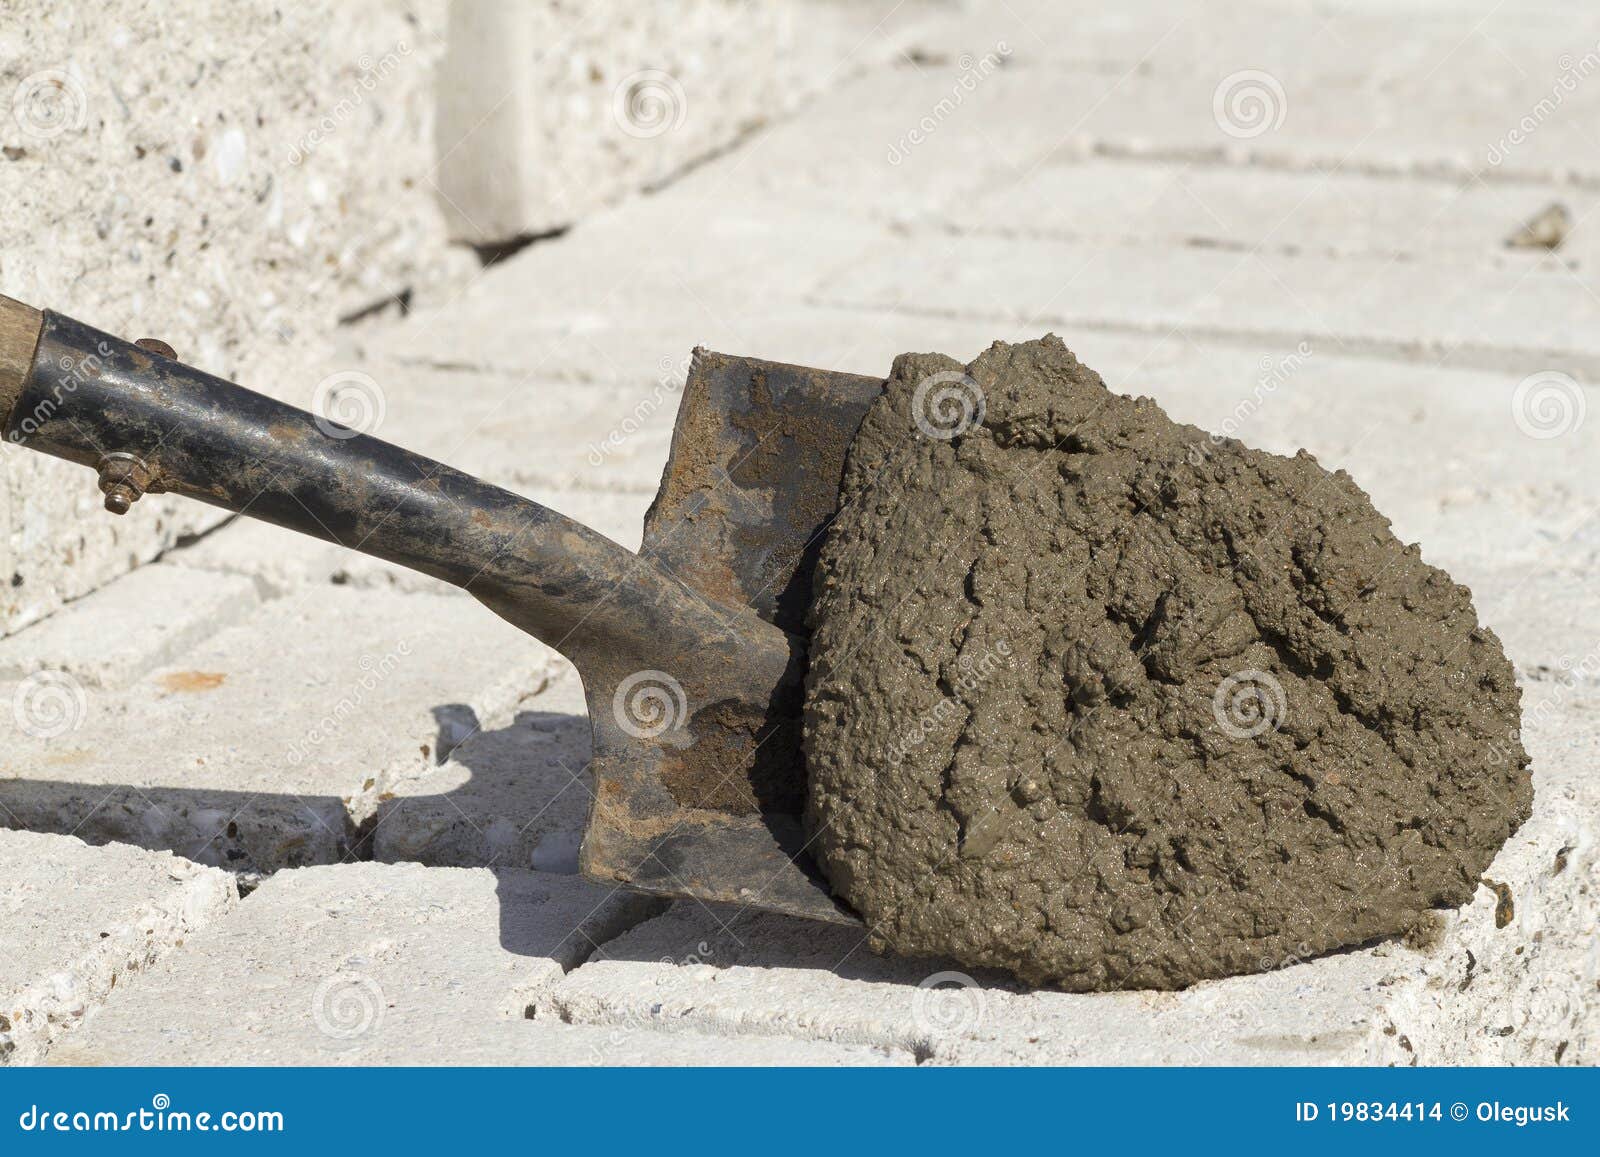 Tool shovel cement stock photo. Image of tool, steel - 19834414